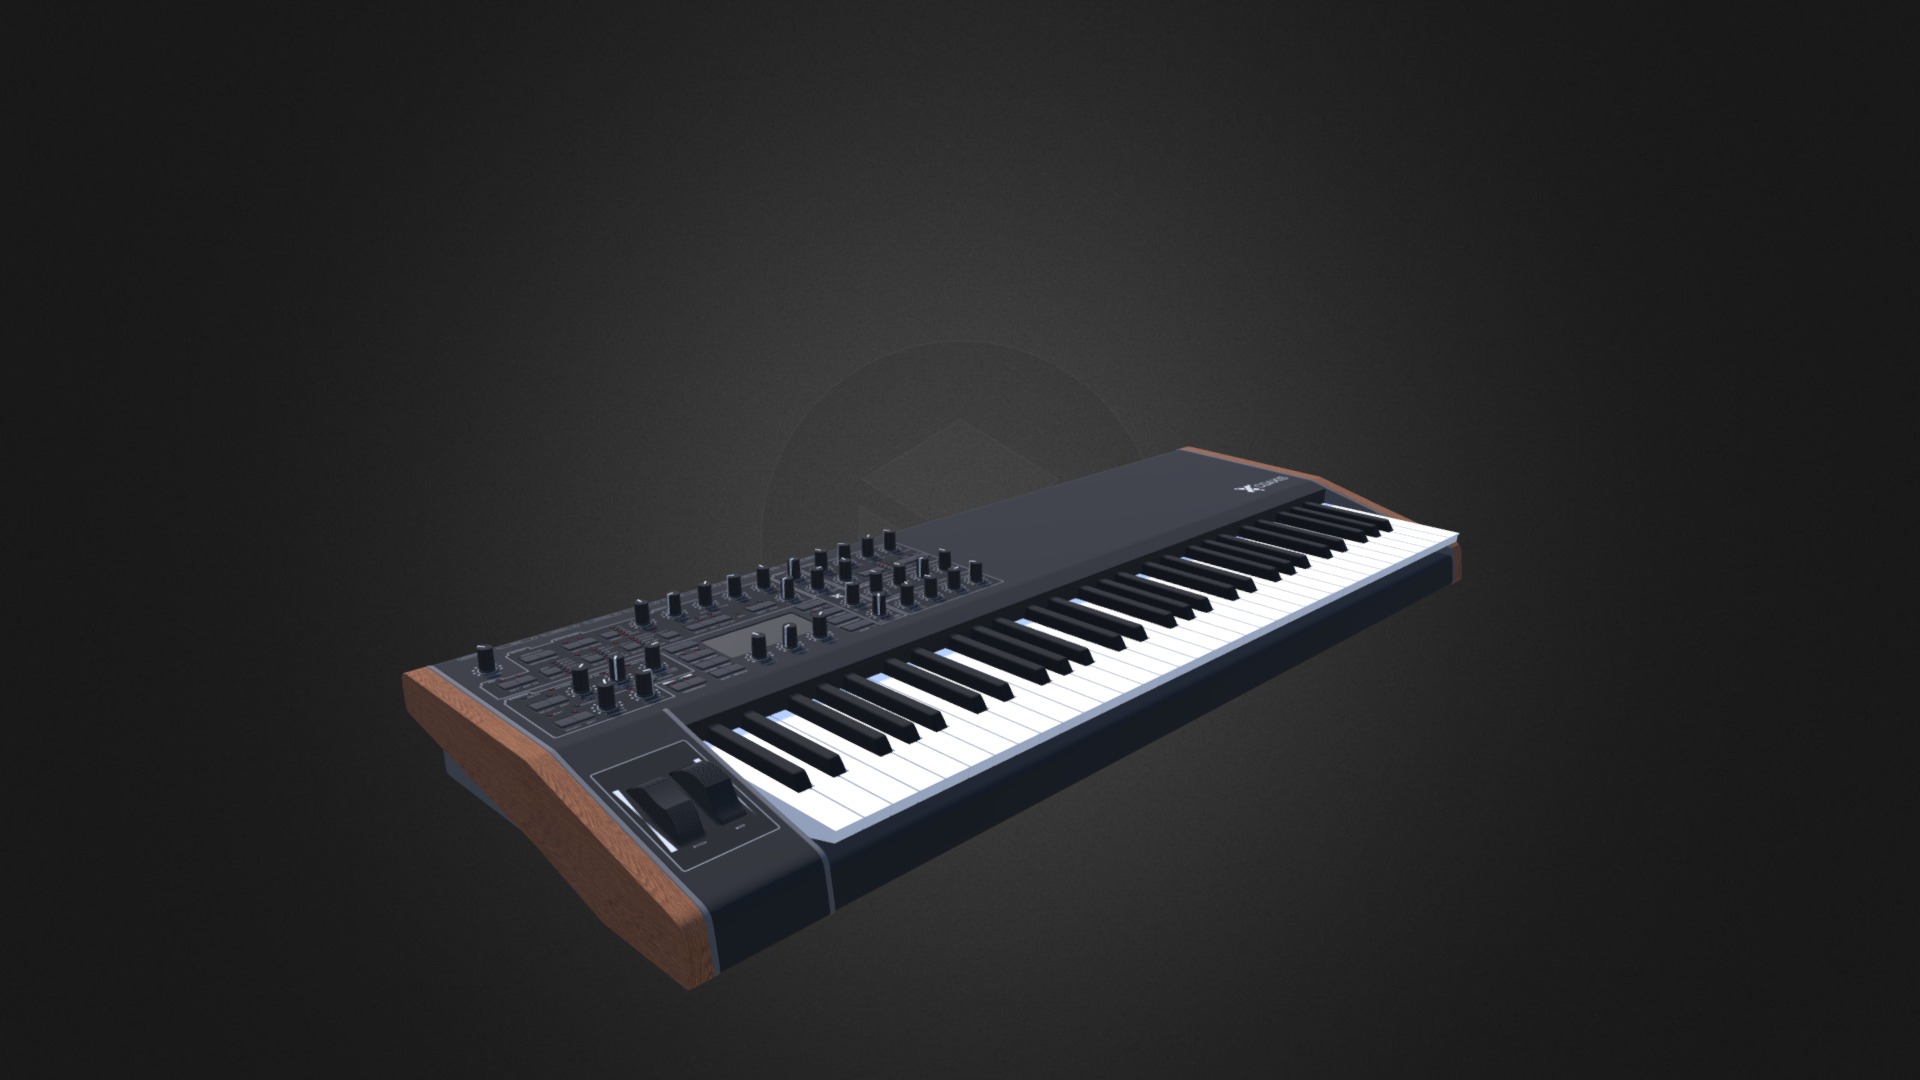 3D model Keyboard Workstation 2 - This is a 3D model of the Keyboard Workstation 2. The 3D model is about a keyboard with a light on top.